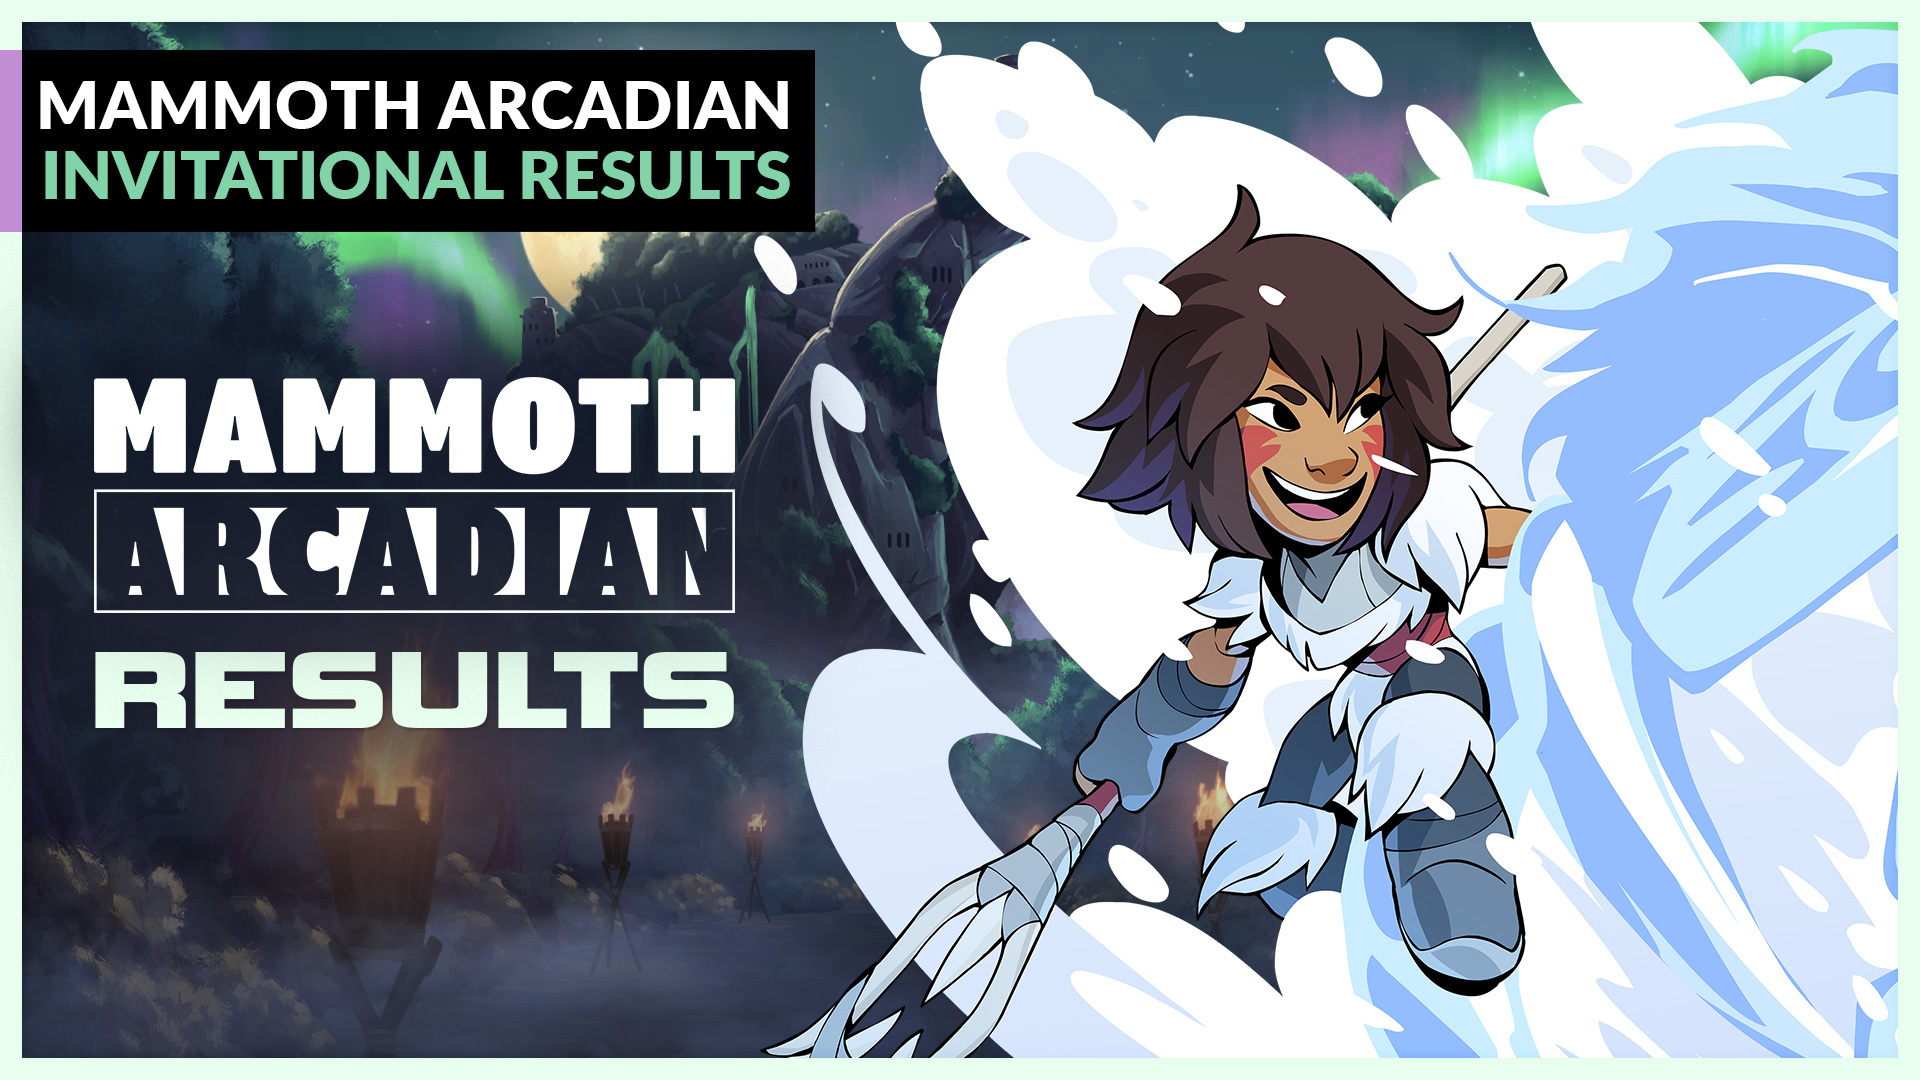 Impala wins the NA Mammoth Arcadian and Magi is victorious in EU!